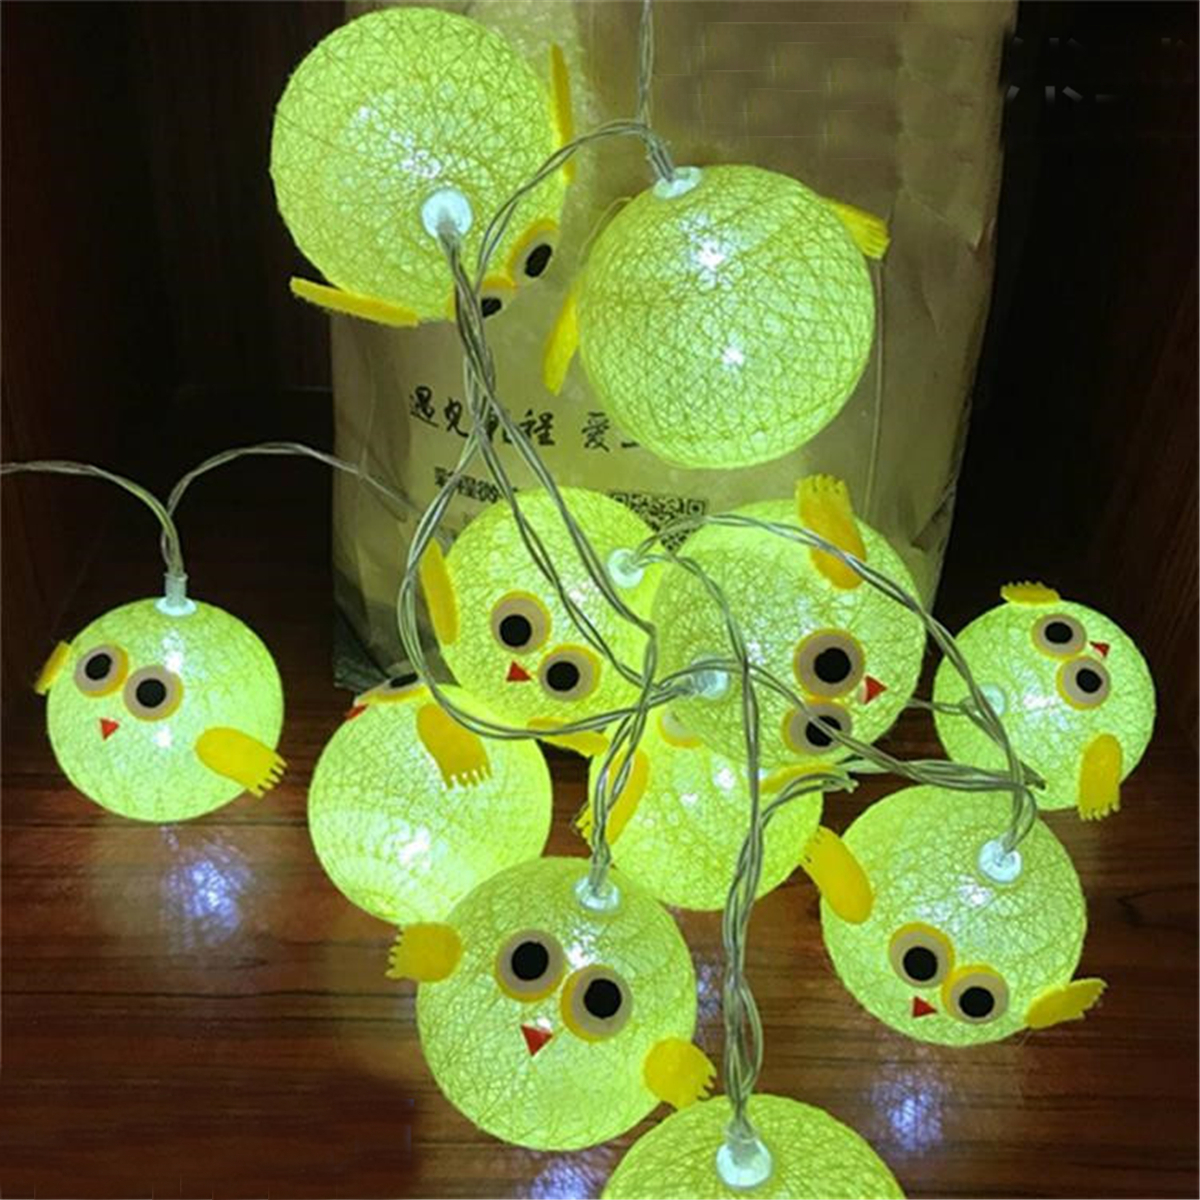 101520-Chicken-Cotton-Fairy-String-Light-Birthday-Party-Kids-Bedroom-Decorations-1640768-4